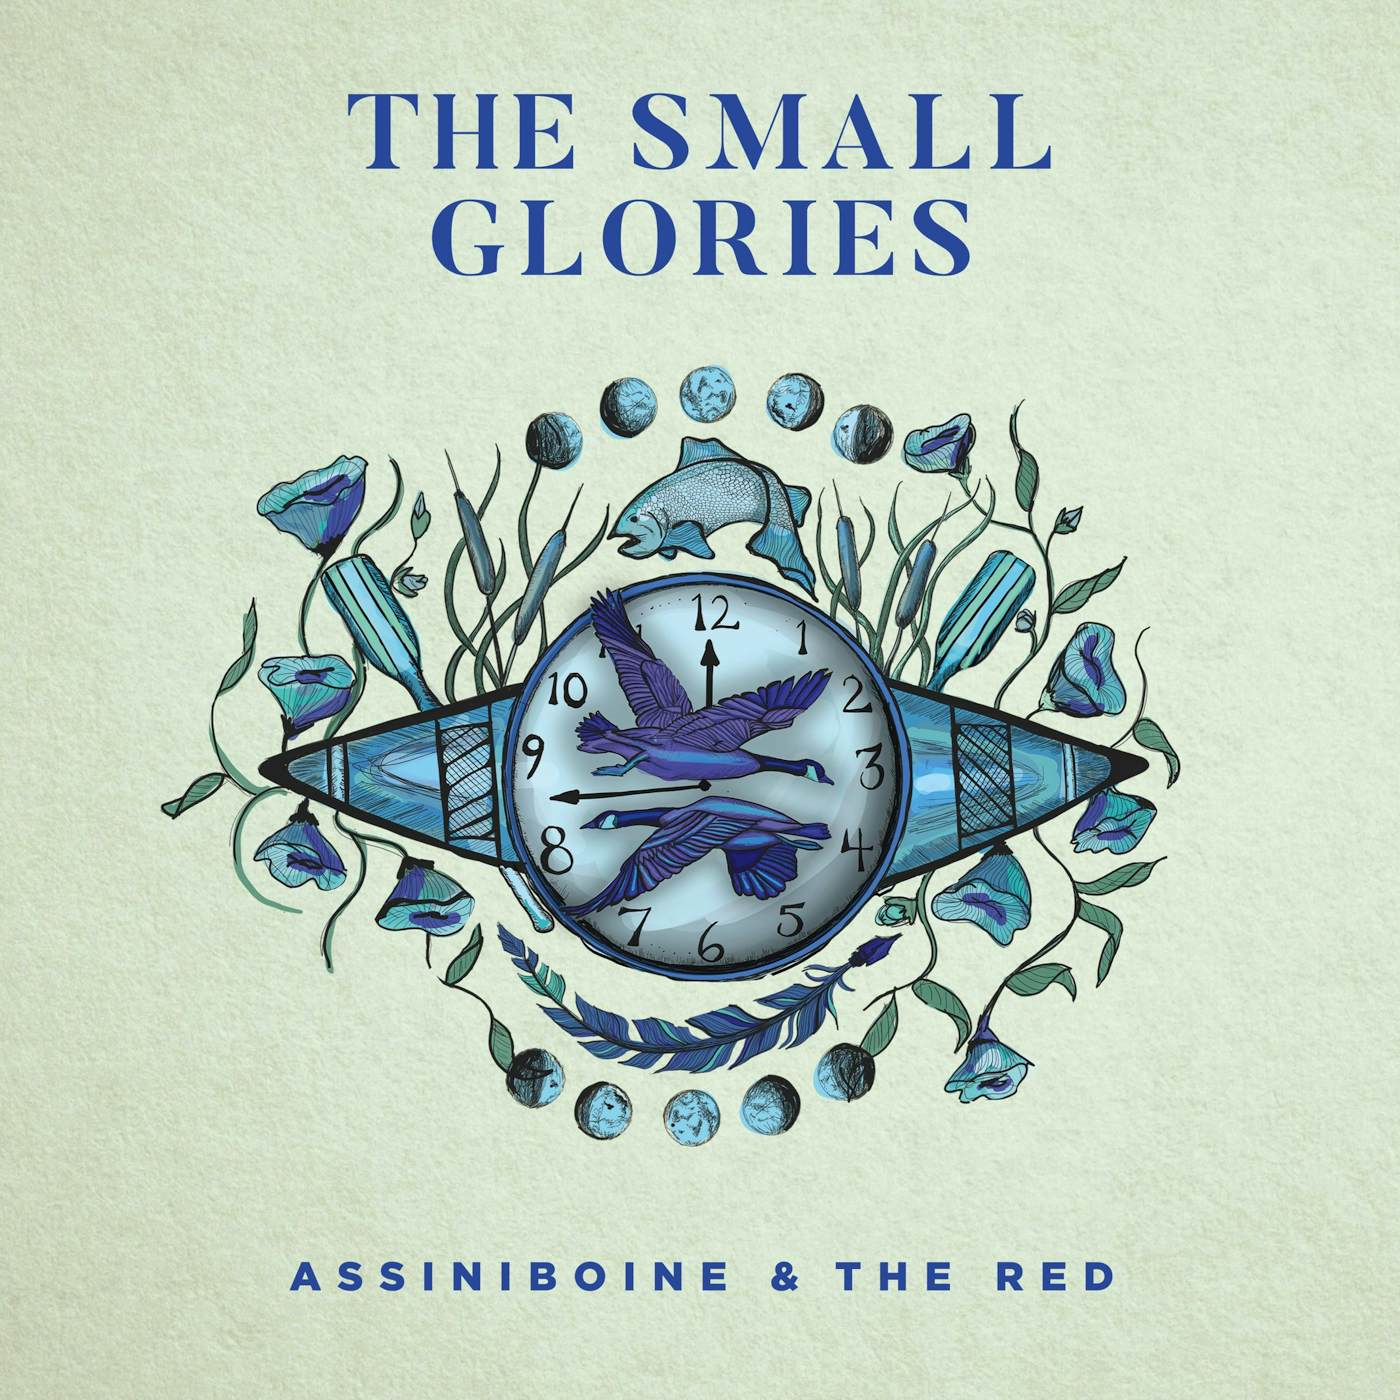 The Small Glories Assiniboine & The Red CD